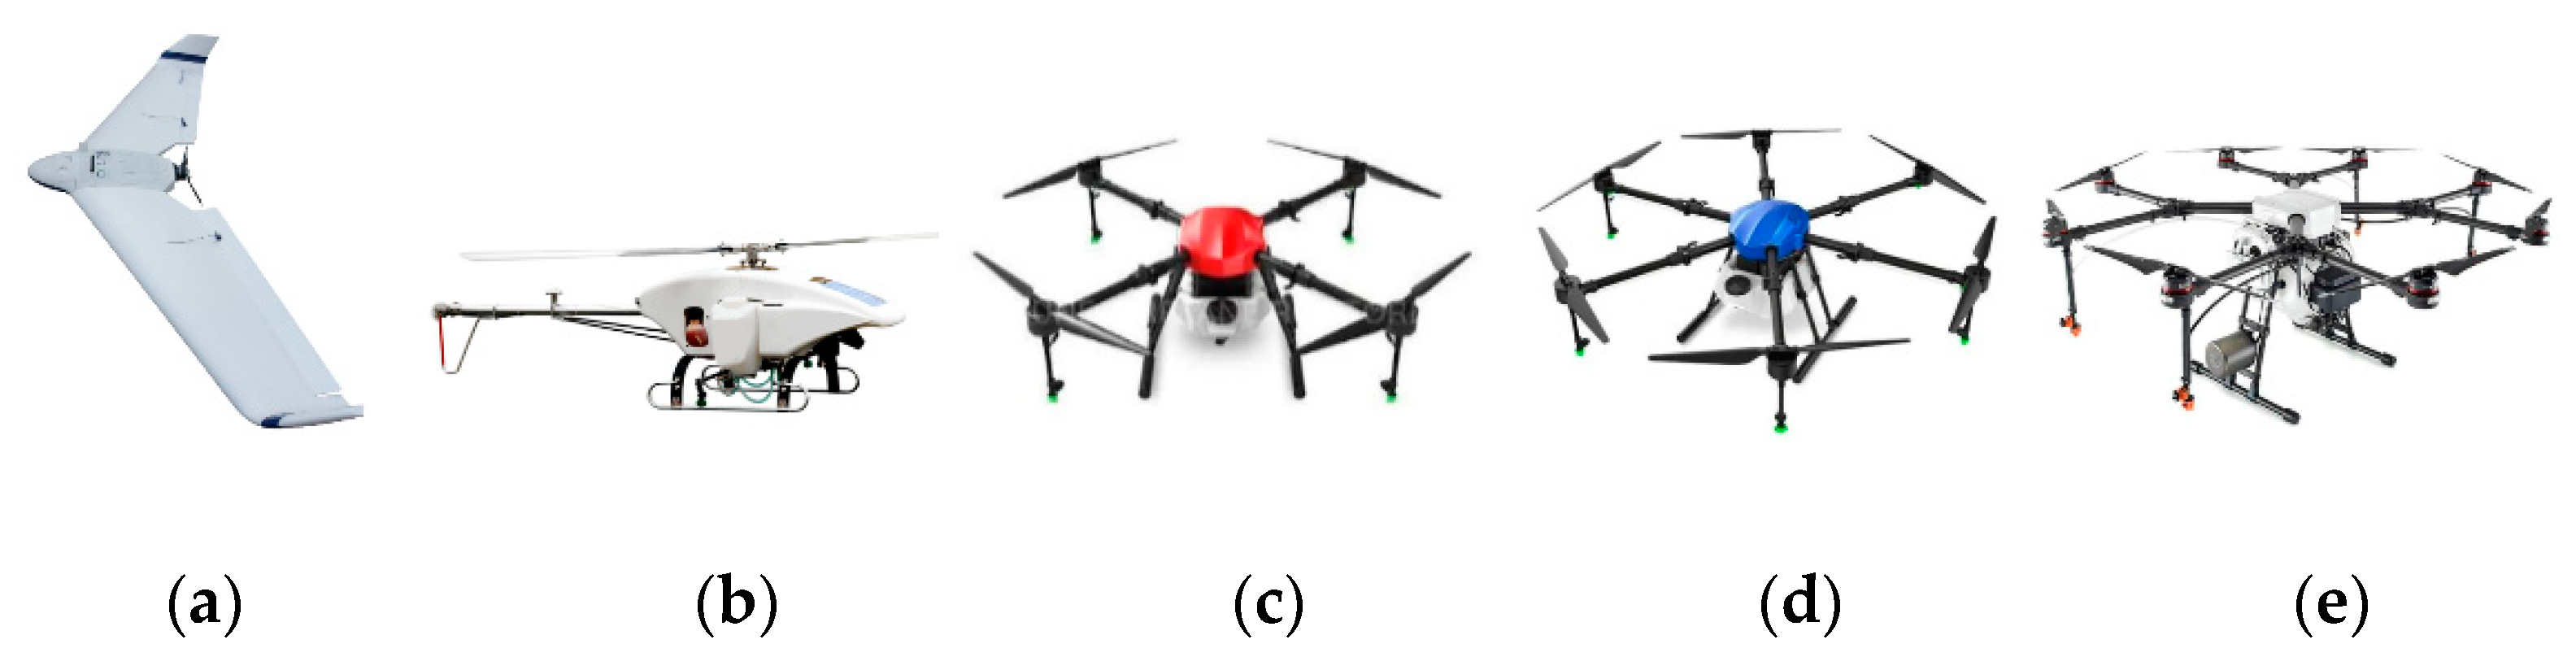 Frontiers  Effect of flight velocity on droplet deposition and drift of  combined pesticides sprayed using an unmanned aerial vehicle sprayer in a  peach orchard